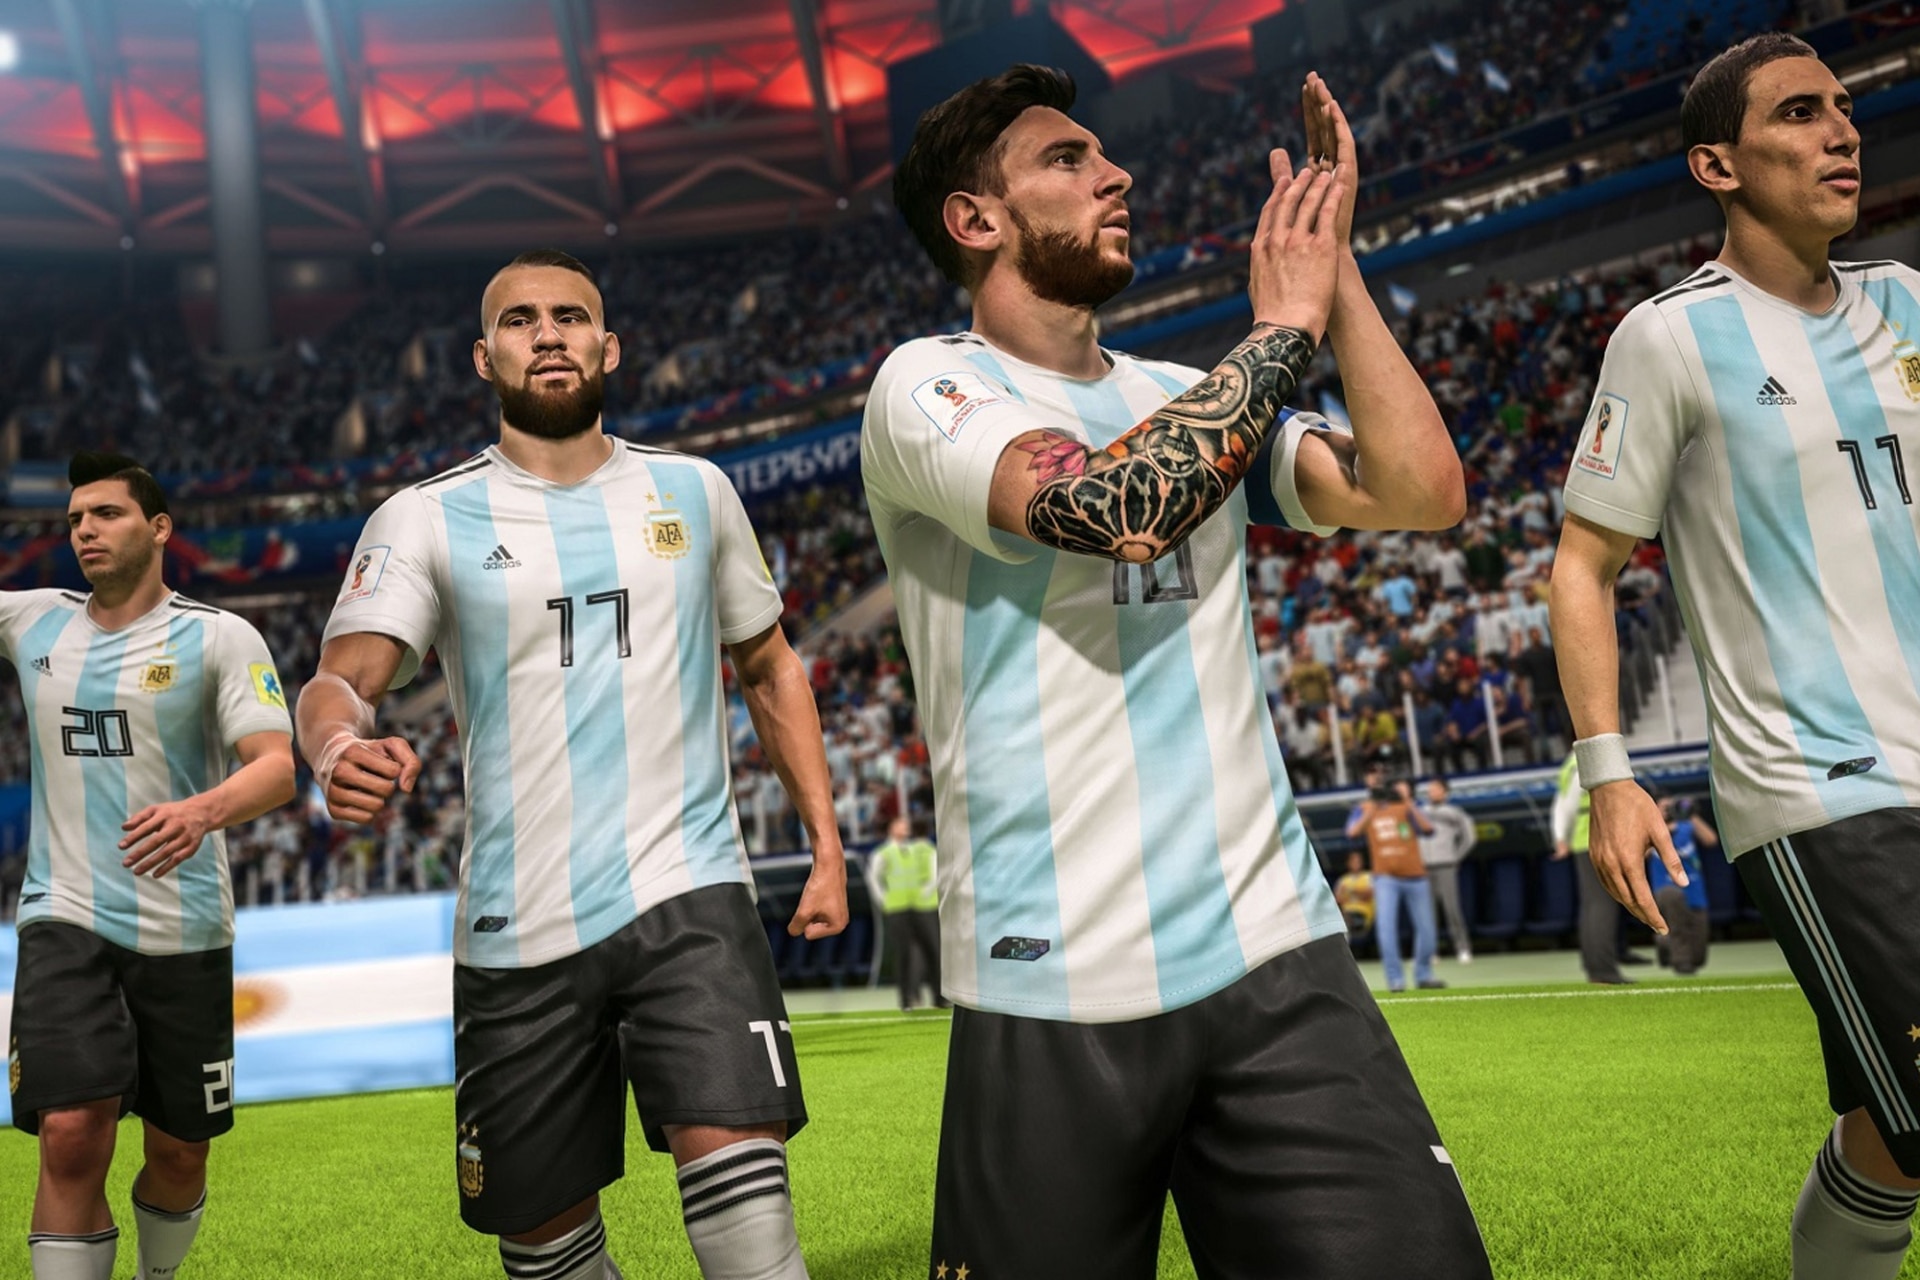 FIFA 18 WORLD CUP - SIMULATING A WORLD CUP WITH ENGLAND! 